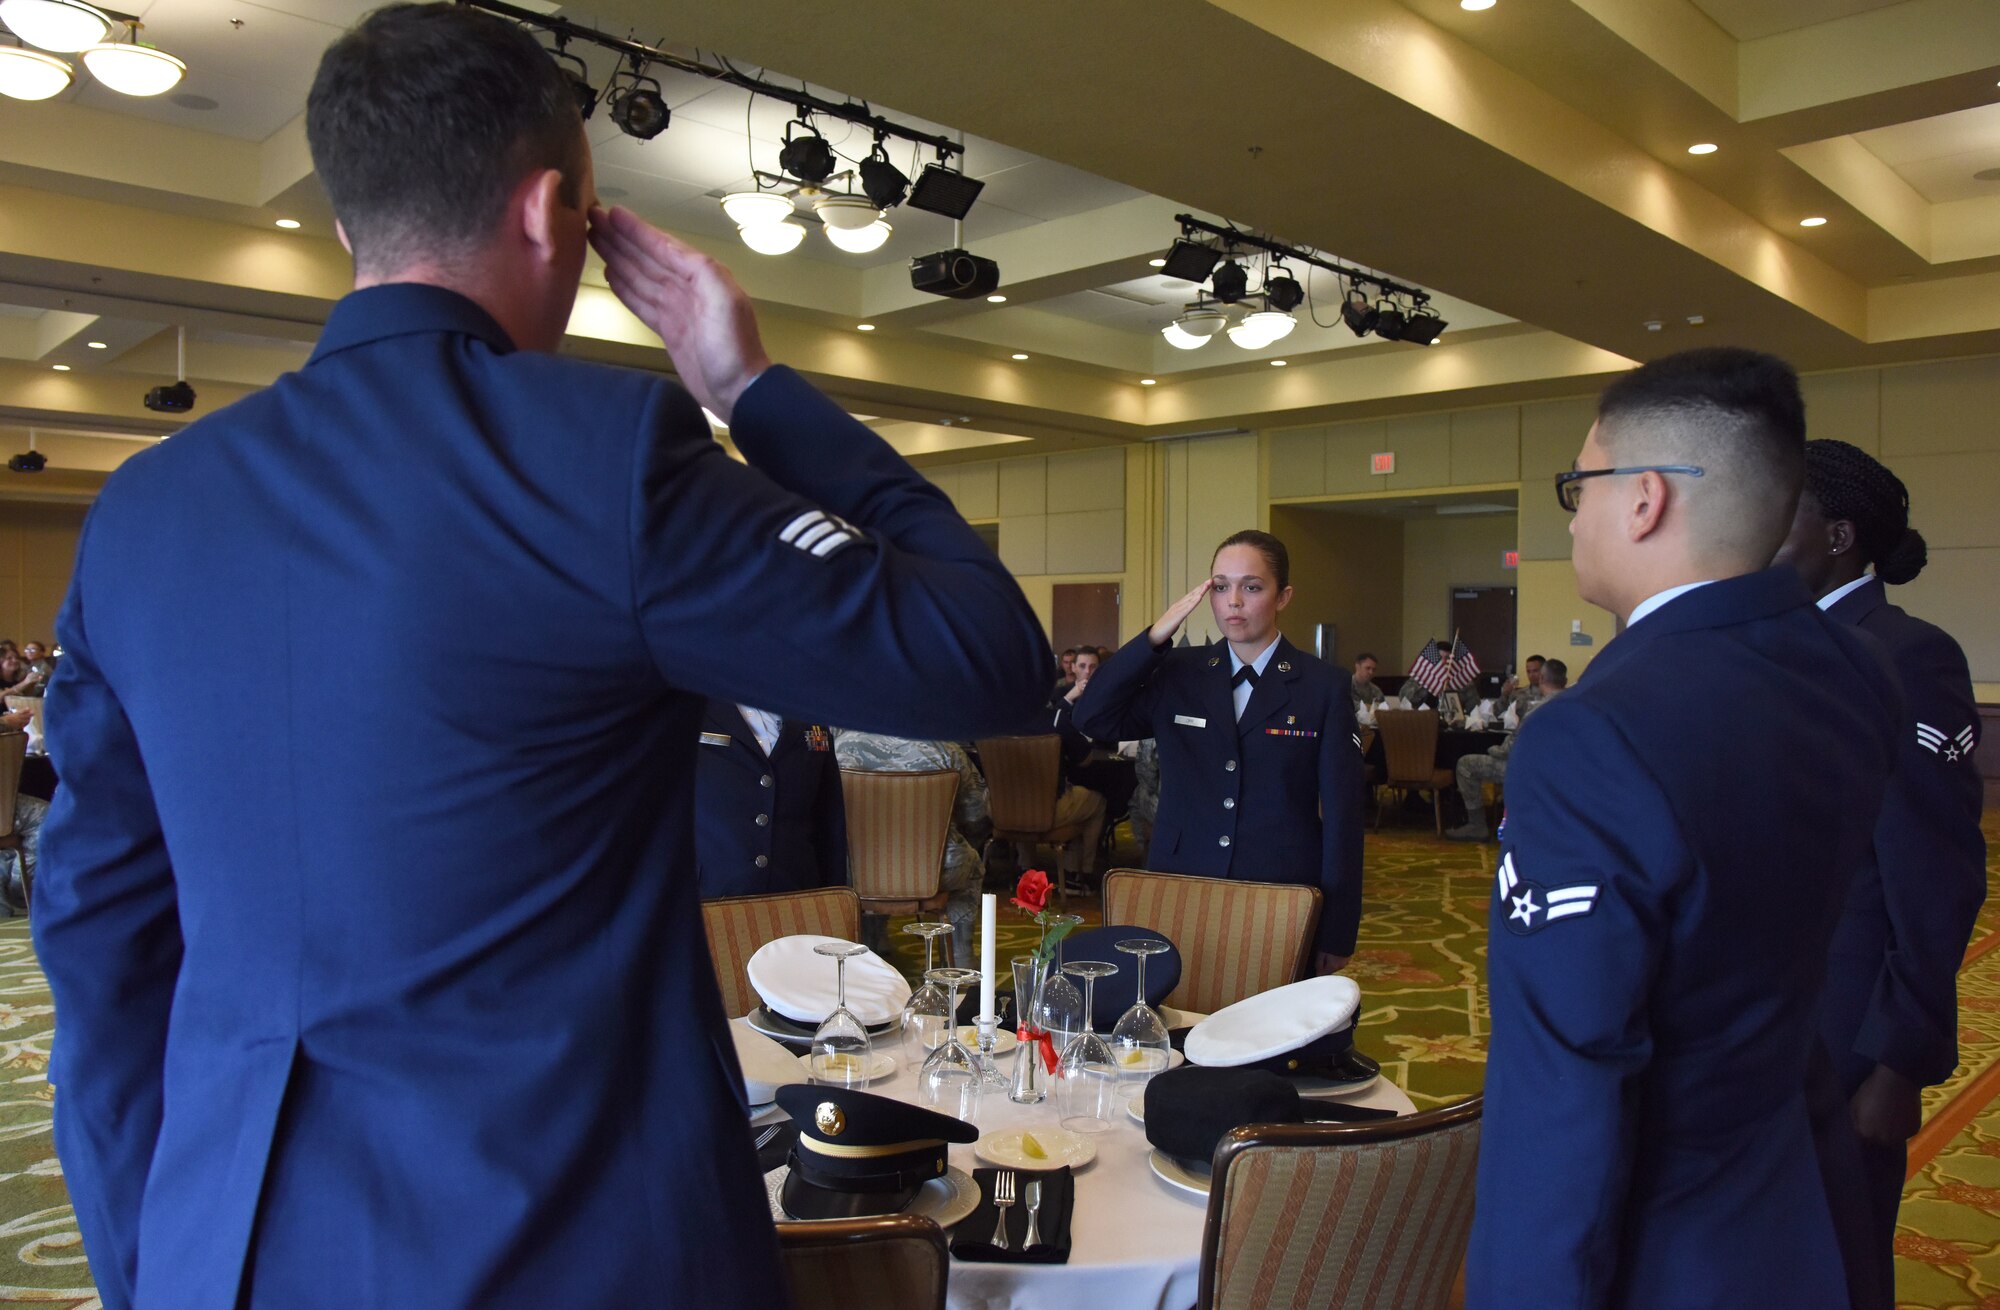 Keesler Airmen participate in a POW/MIA table ceremony during the POW/MIA Remembrance Luncheon at the Bay Breeze Event Center at Keesler Air Force Base, Mississippi, Sept. 21, 2018. The event, hosted by the Air Force Sergeants Association, was held to raise awareness and to pay tribute to all prisoners of war and those military members still missing in action. (U.S. Air Force photo by Kemberly Groue)